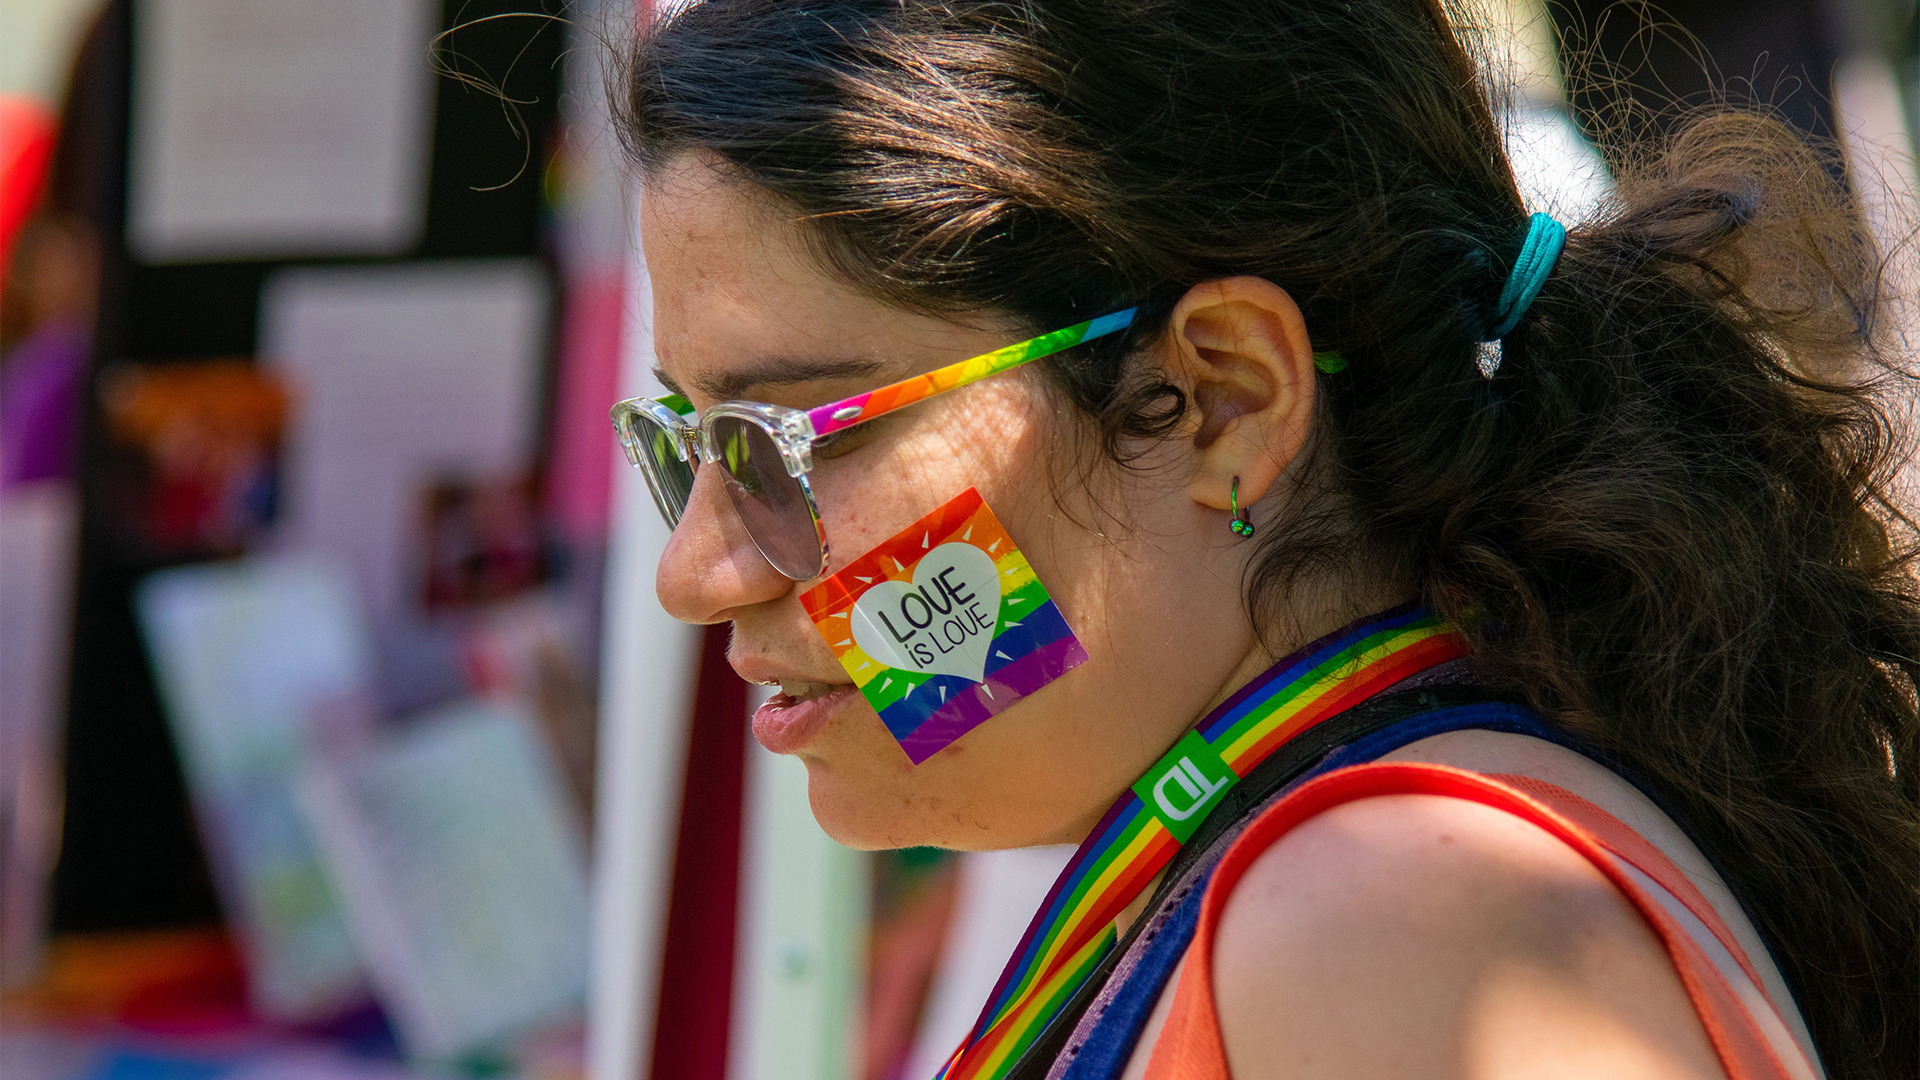 Don’t just slap a rainbow on it – here’s how to support the LGBTQ community in 2020